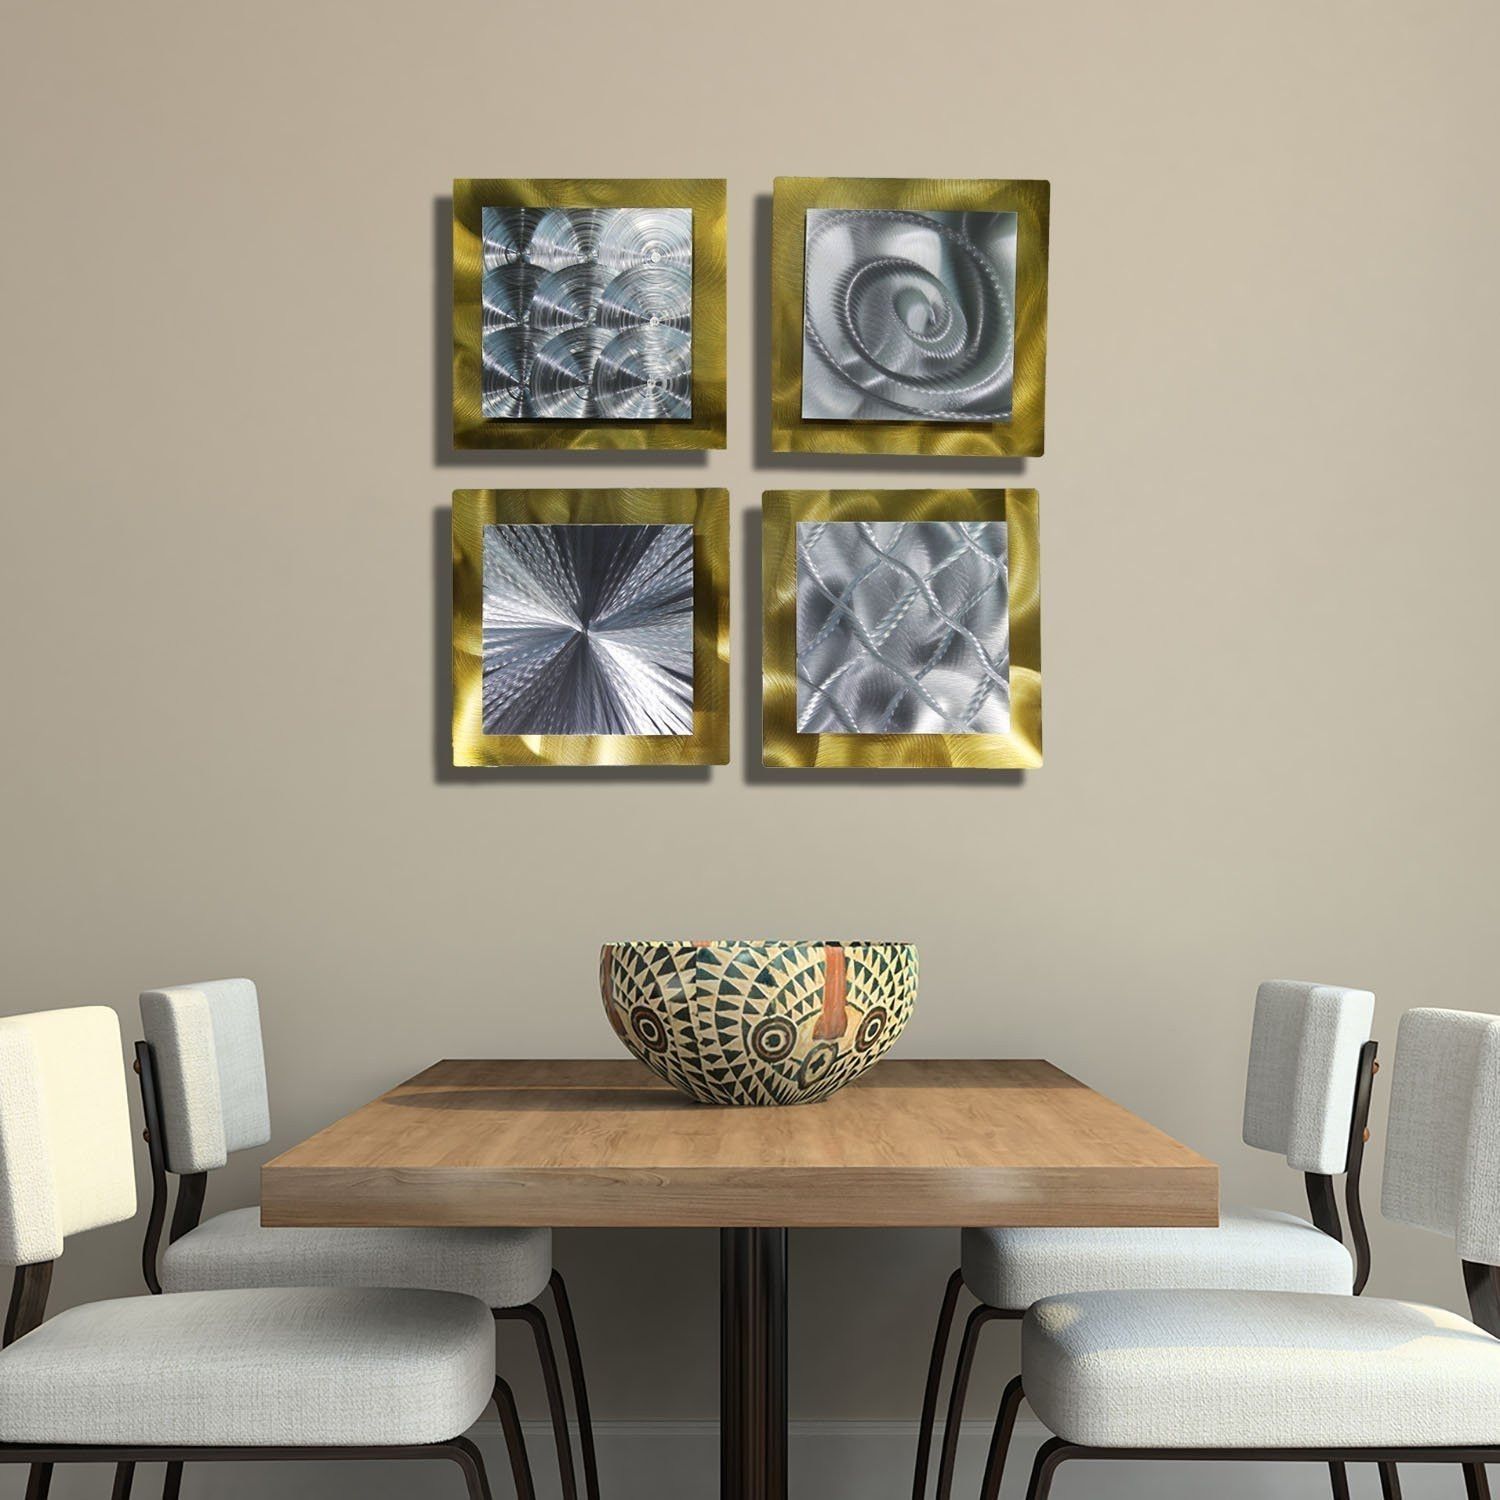 Unbelievable Best Of Contemporary Metal Wall Art Uk Decorative Within Contemporary Metal Wall Art (View 9 of 20)